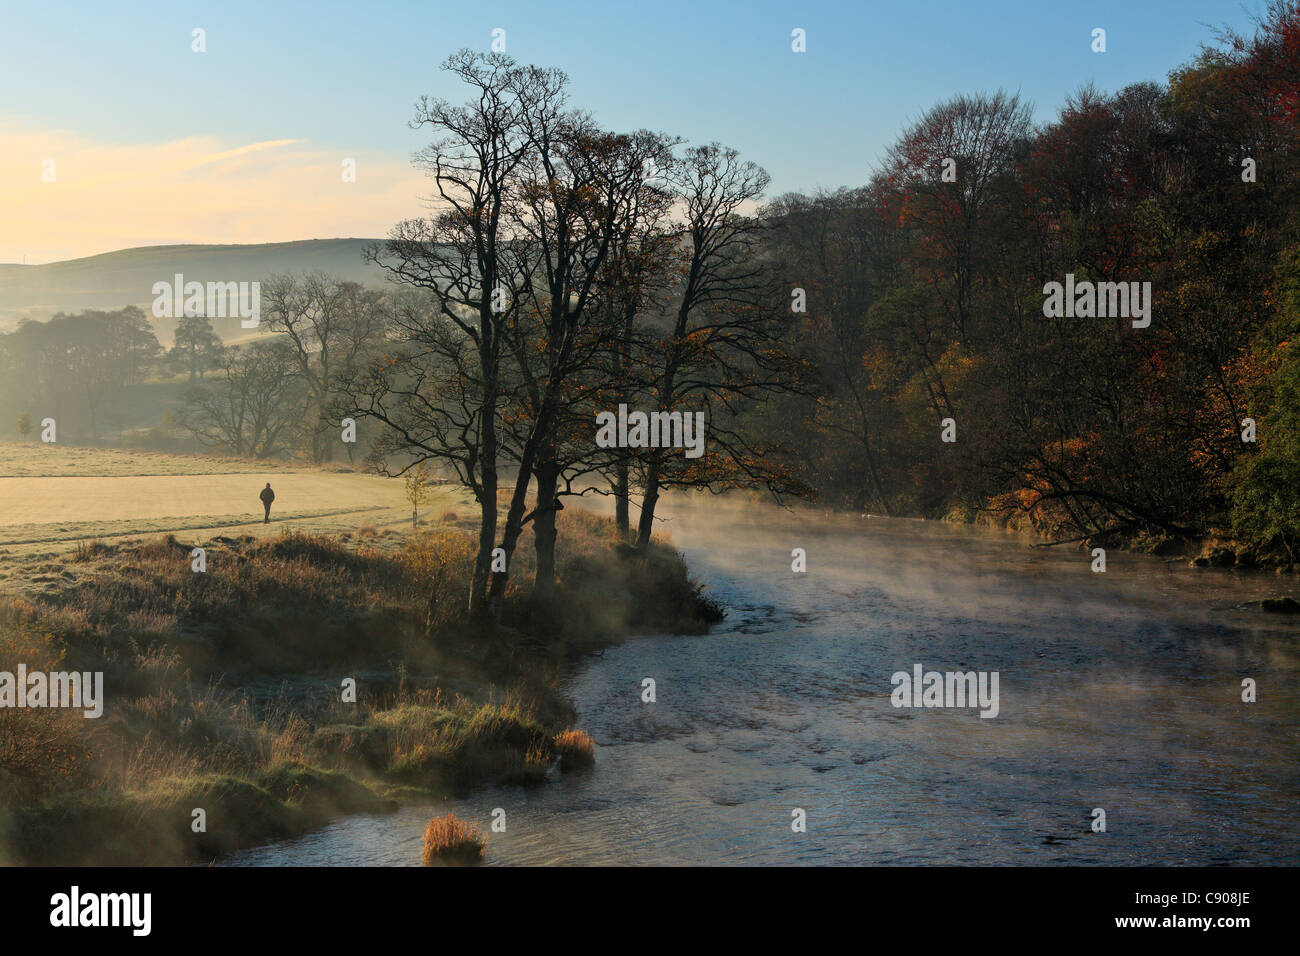 A man walks along the shore of a misty River Wharfe in autumn Stock Photo